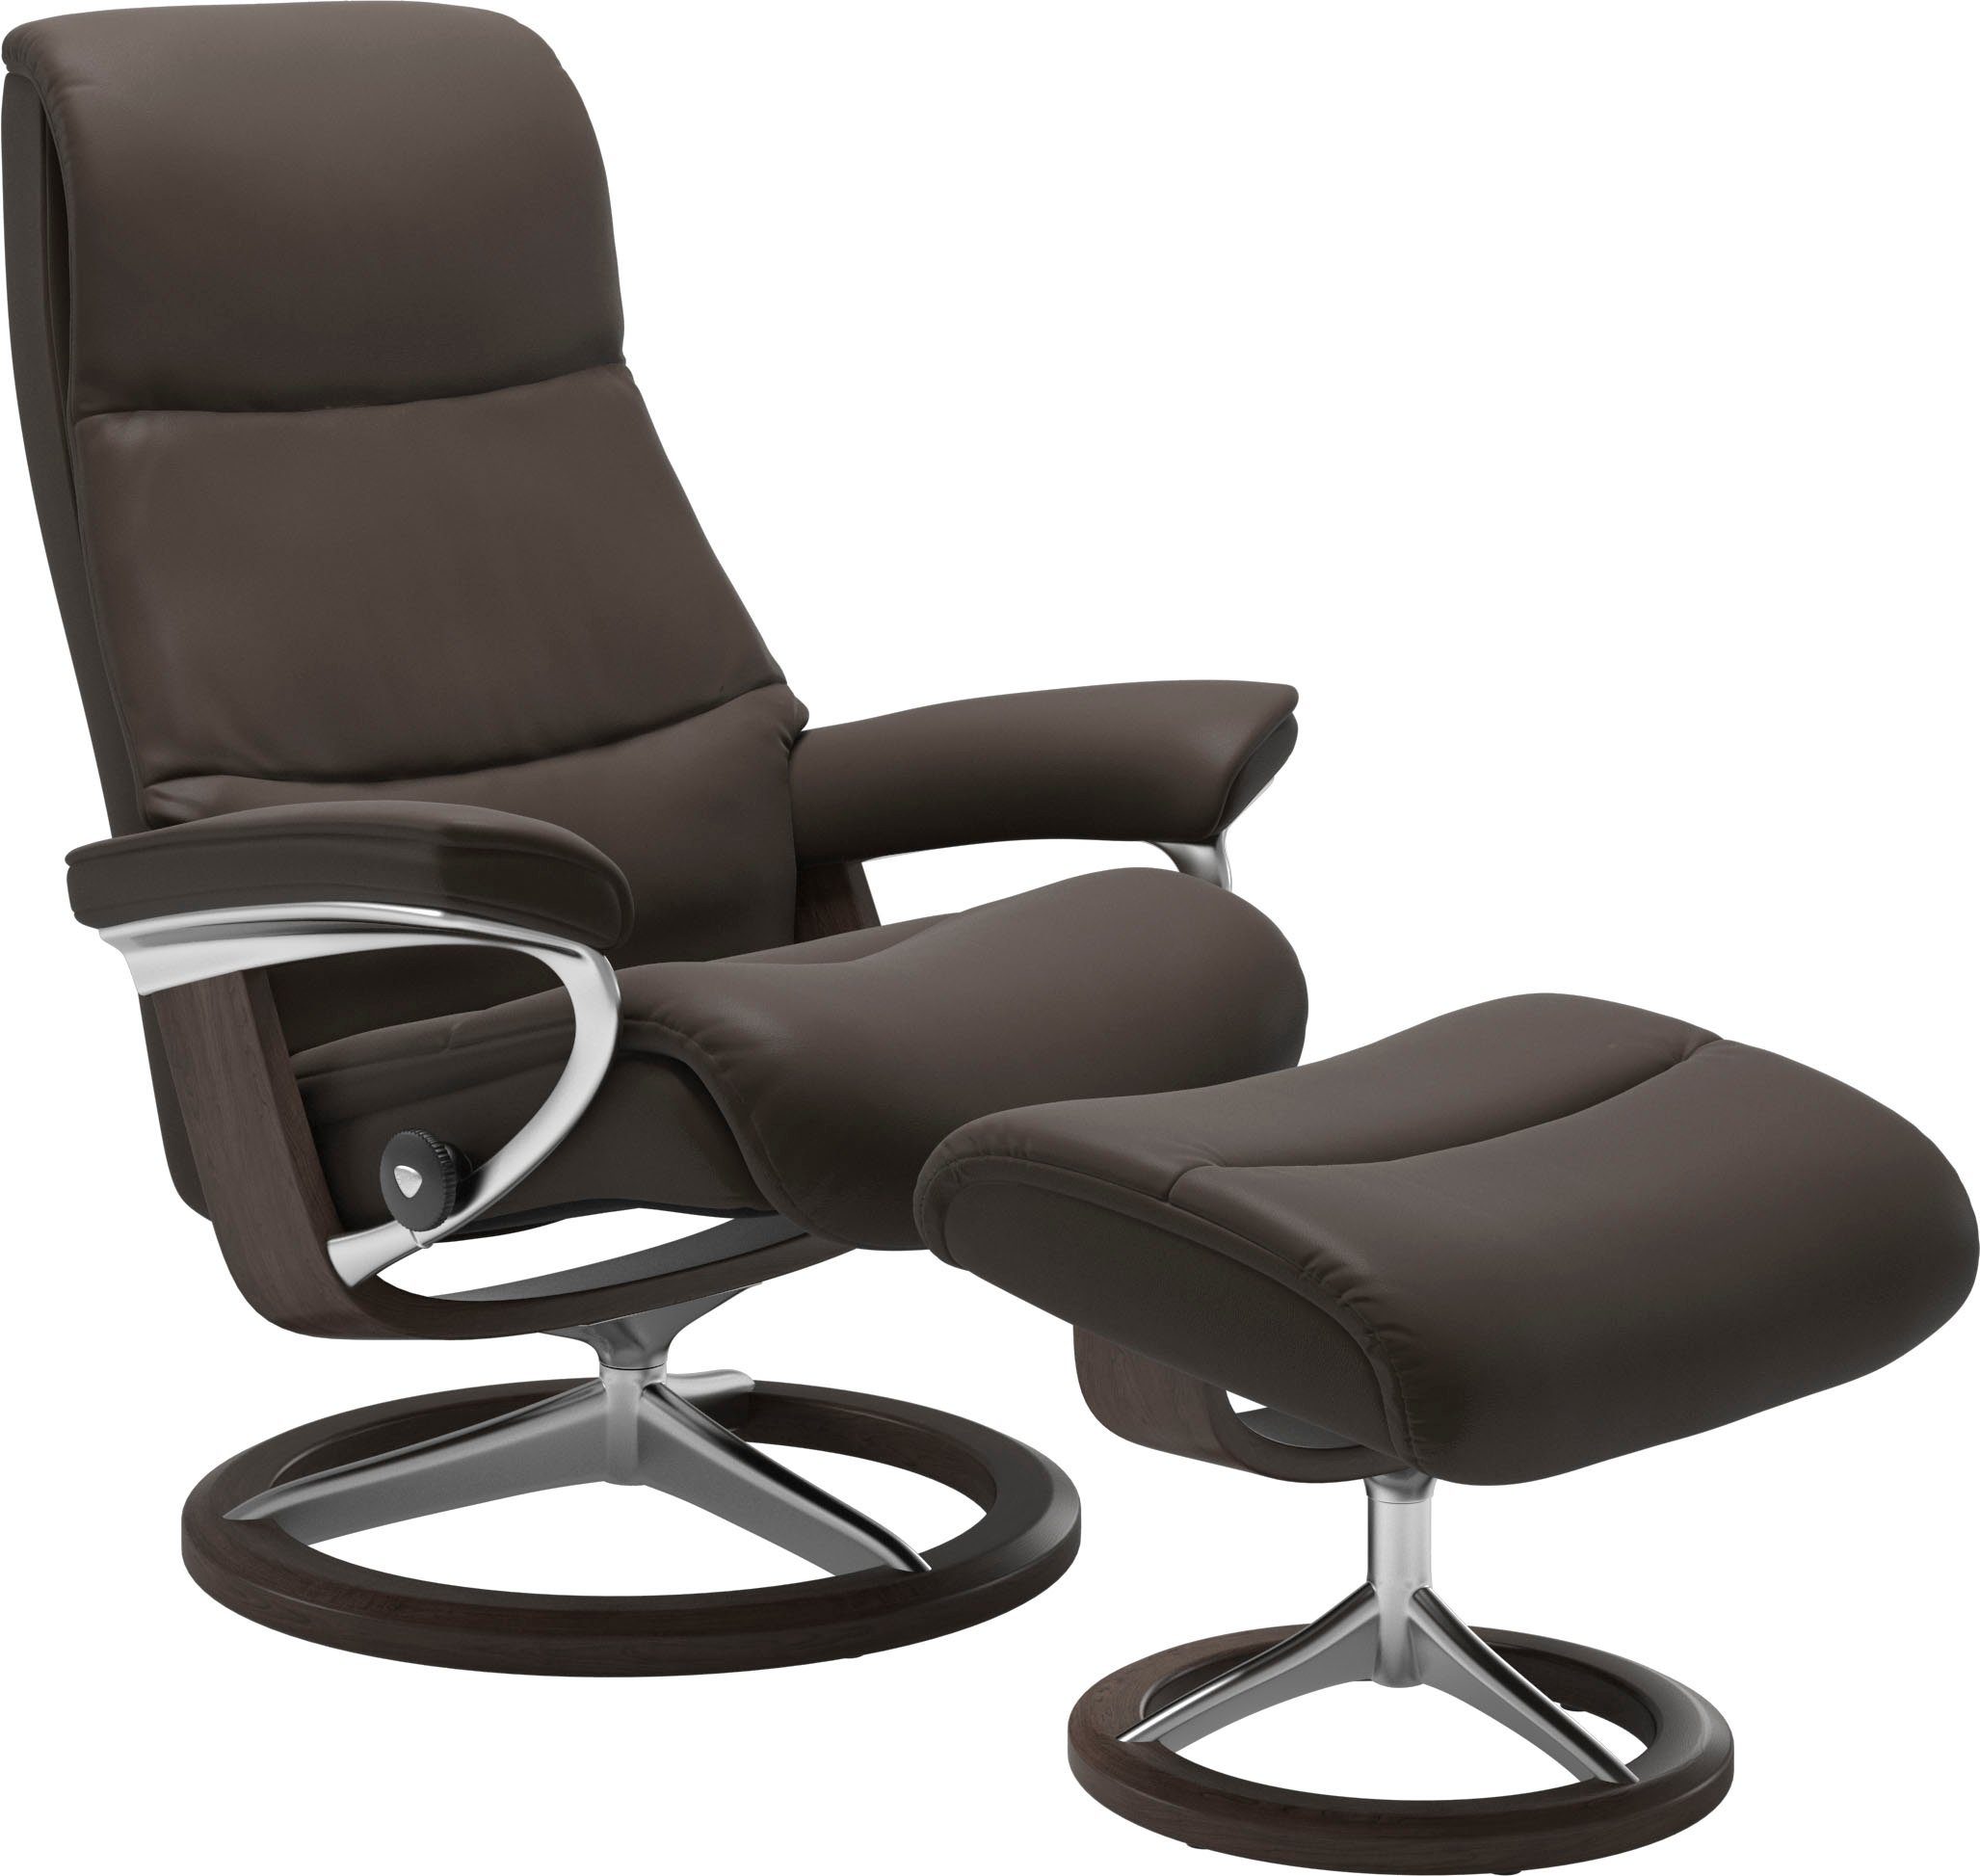 Wenge View, Relaxsessel Größe mit Signature Stressless® L,Gestell Base,